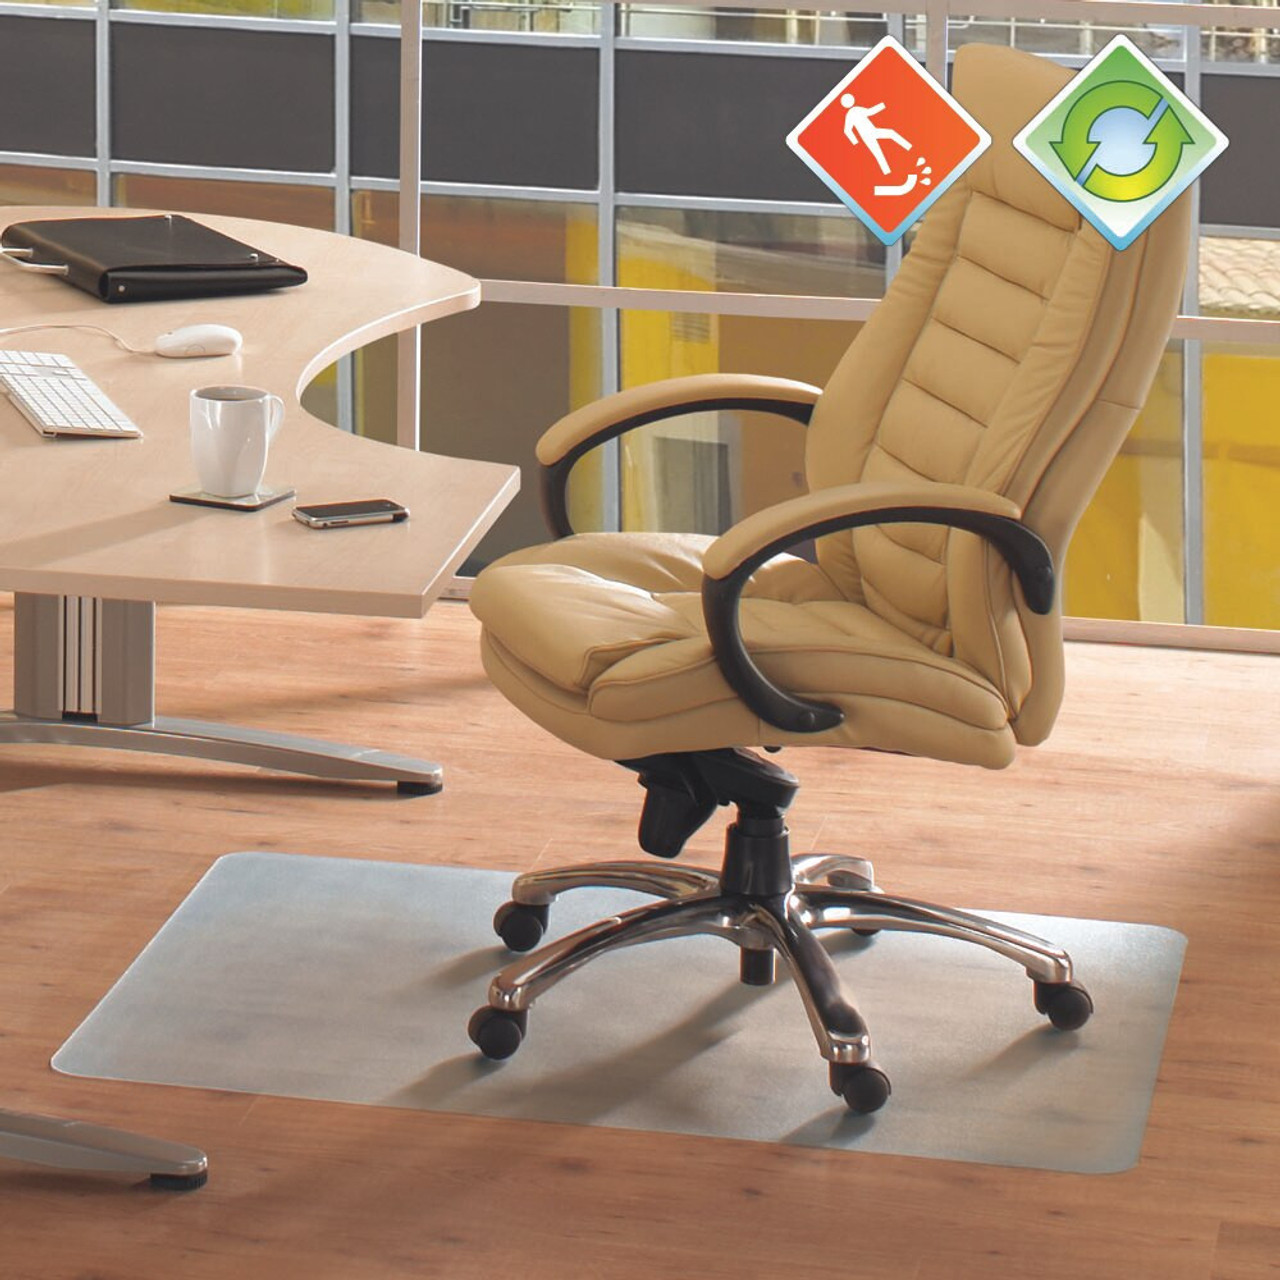 https://cdn11.bigcommerce.com/s-fjwps1jbkv/images/stencil/1280x1280/products/254/3074/ecotex-evolutionmat-or-anti-slip-recyclable-chair-mat-for-hard-floors-or-rectangular-floor-protectoror-multiple-sizes__54640.1688988391.jpg?c=2?imbypass=on